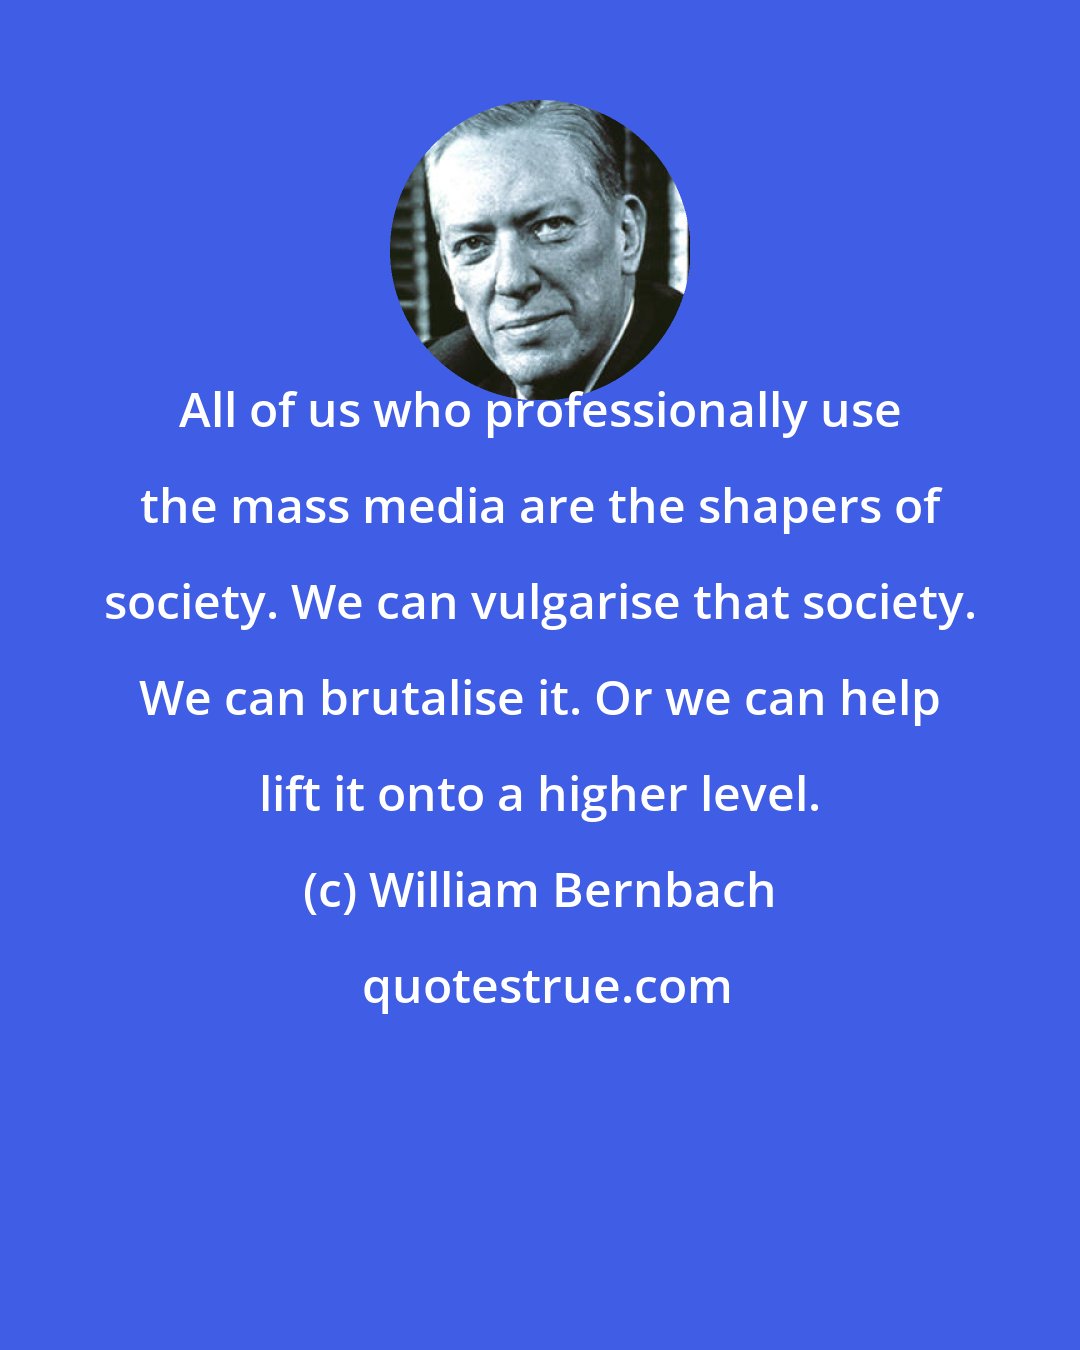 William Bernbach: All of us who professionally use the mass media are the shapers of society. We can vulgarise that society. We can brutalise it. Or we can help lift it onto a higher level.